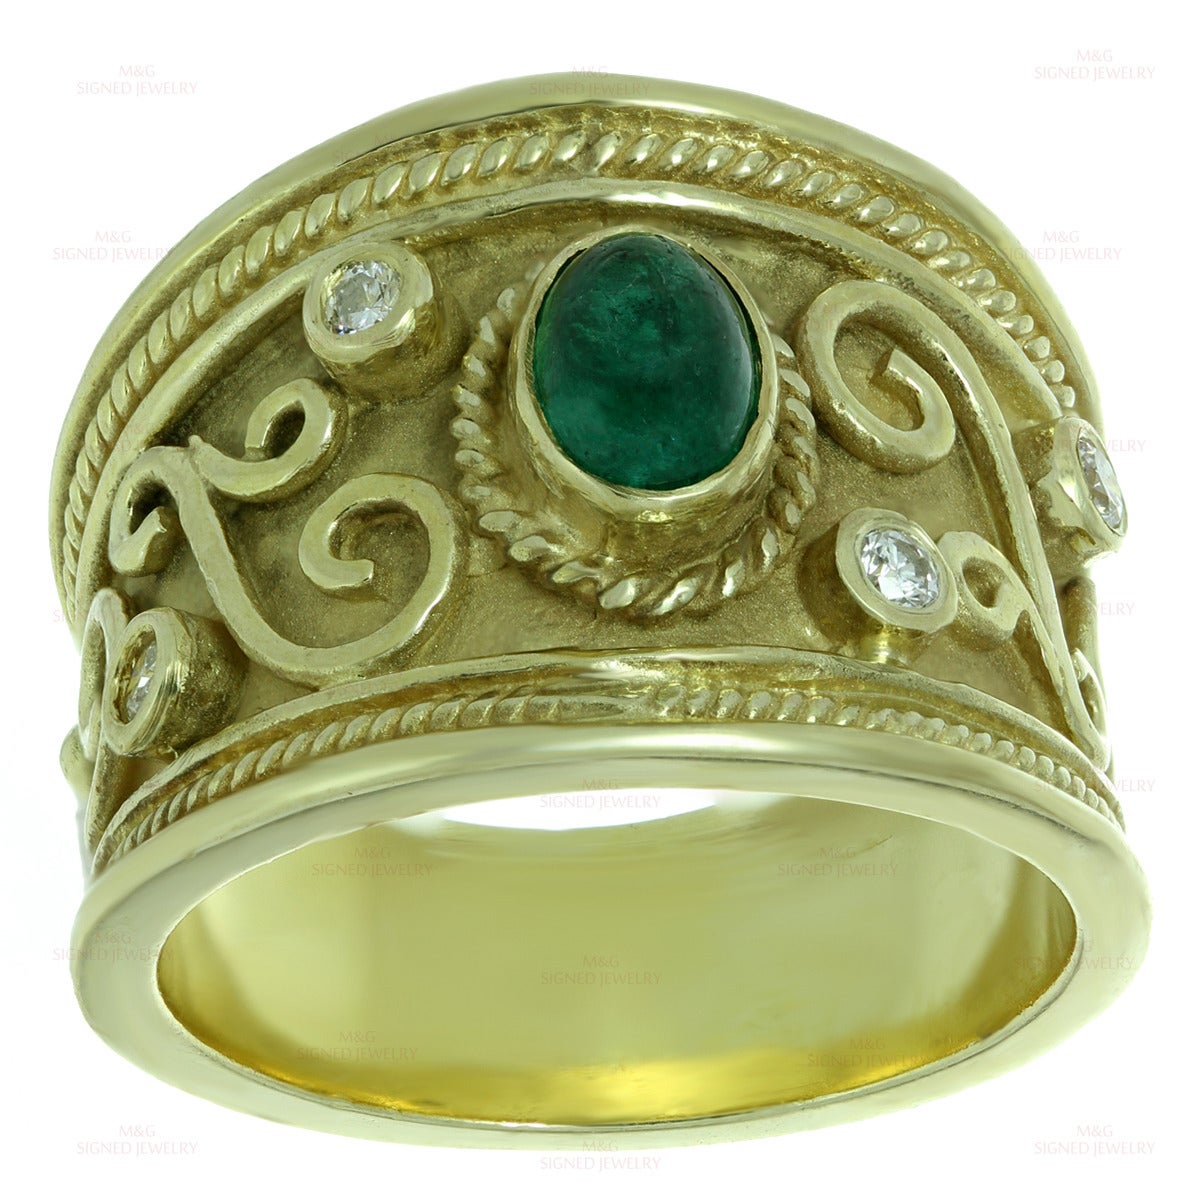 This elegant Byzantine-era inspired wide band is made in 14k yellow gold and bezel-set with a 4.0mm x 6.0mm oval cabochon emerald stone of an estimated 0.60 carats and 4 round brilliant-cut H-I VS1-VS2 diamonds of an estimated 0.16 carats. Made in